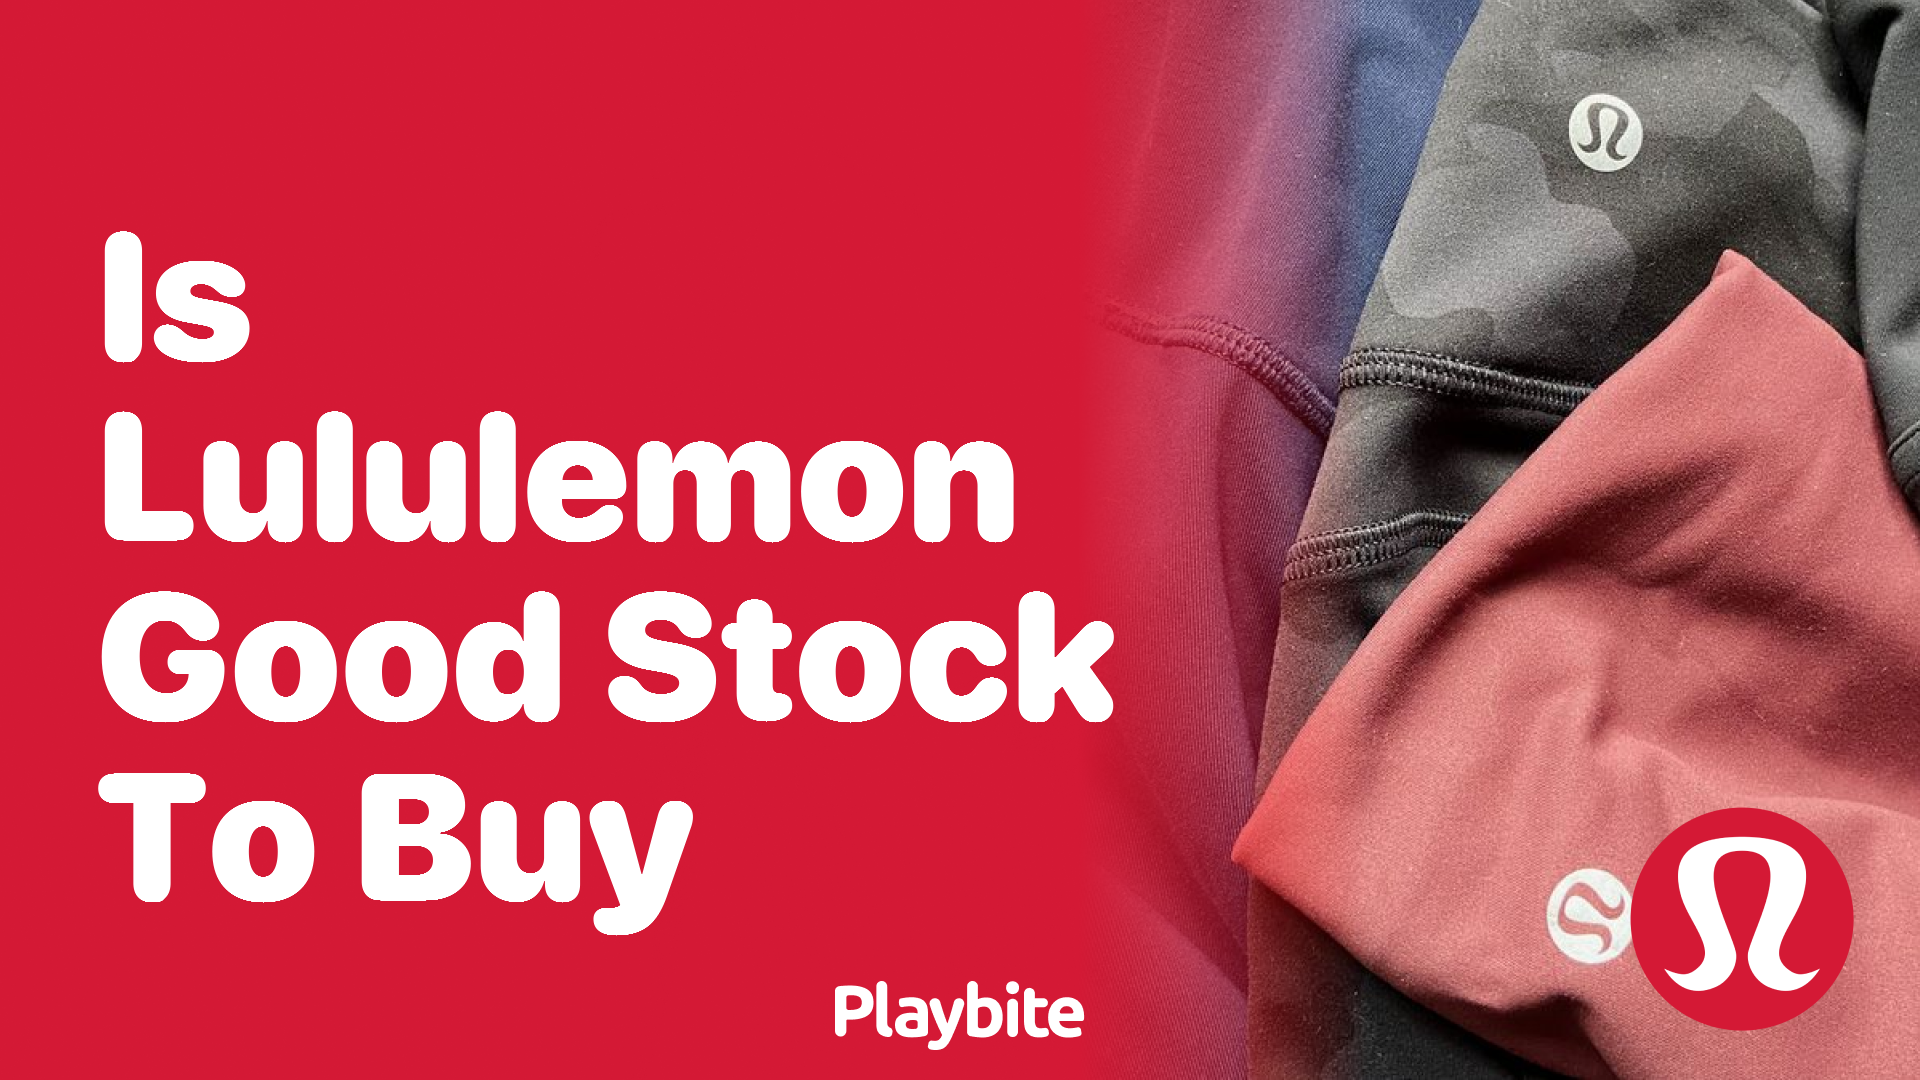 Buy One Share of Lululemon Stock as a Gift in 1 Minute